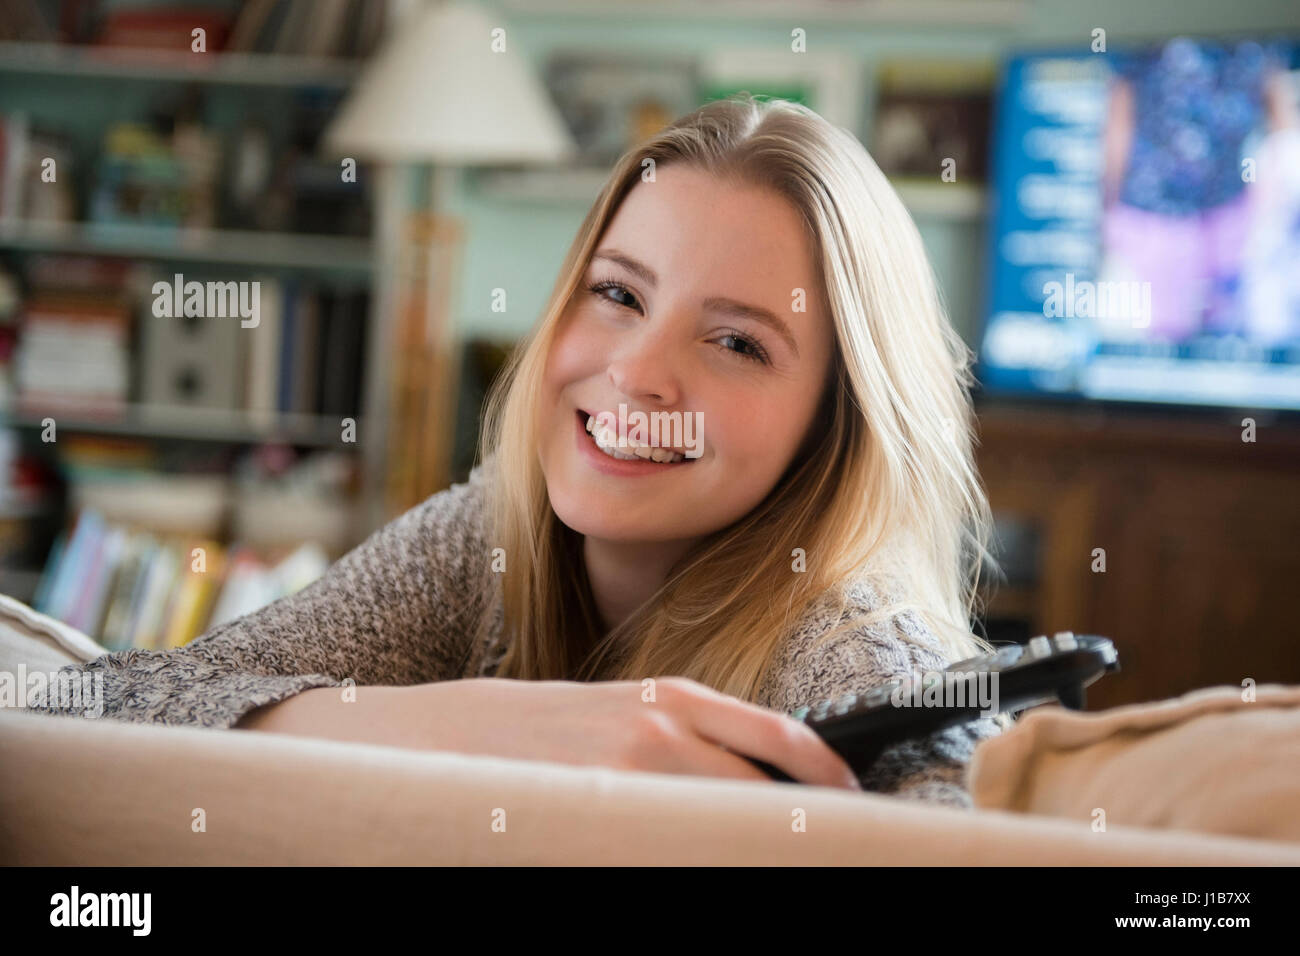 Smiling woman leaning on sofa holding remote control Stock Photo